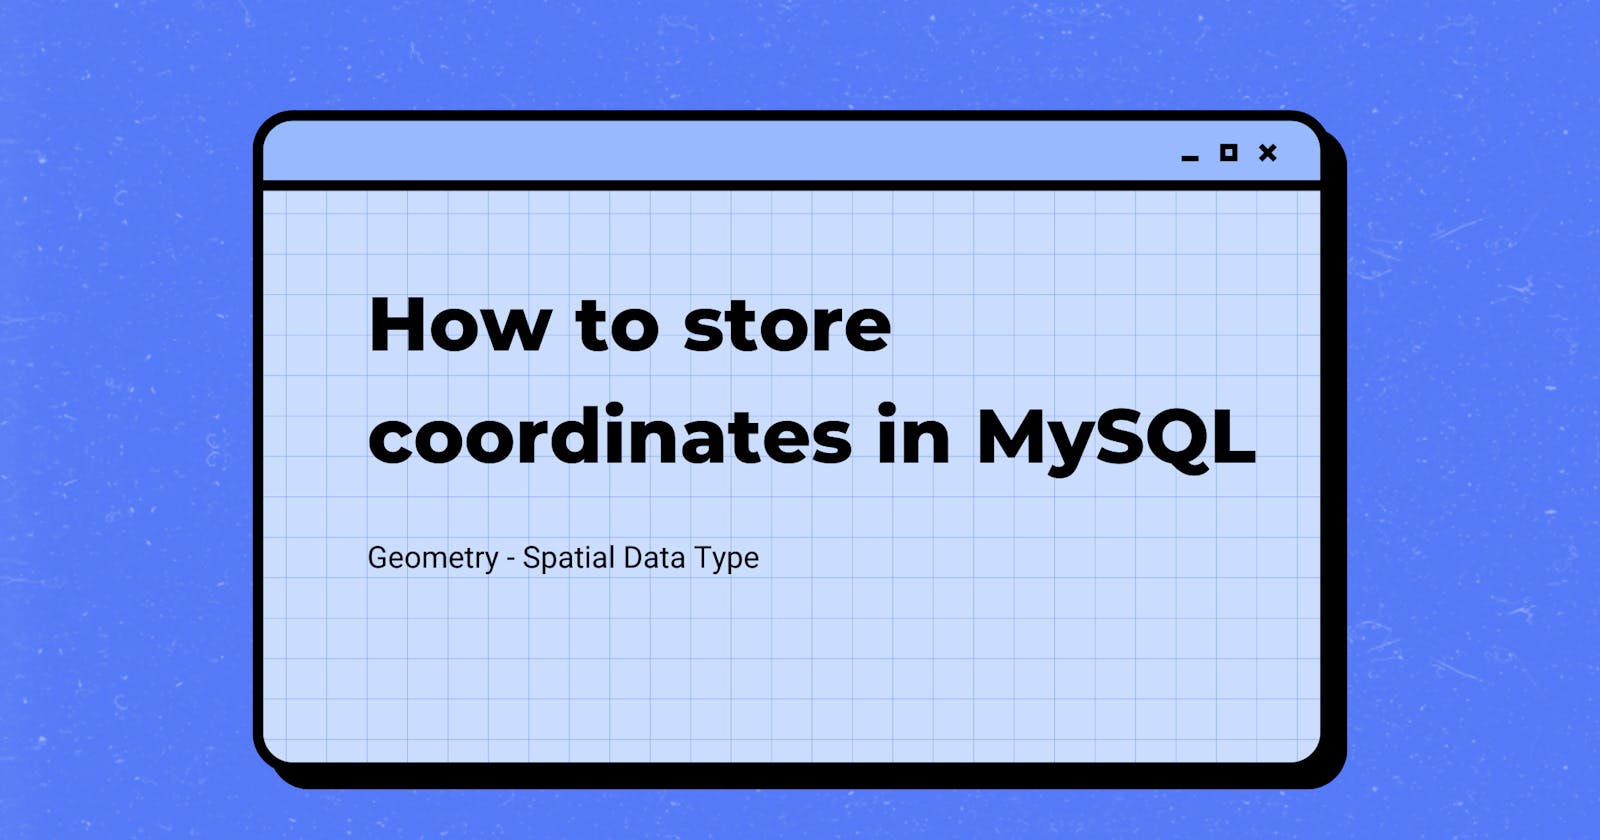 How to store coordinates in MySQL